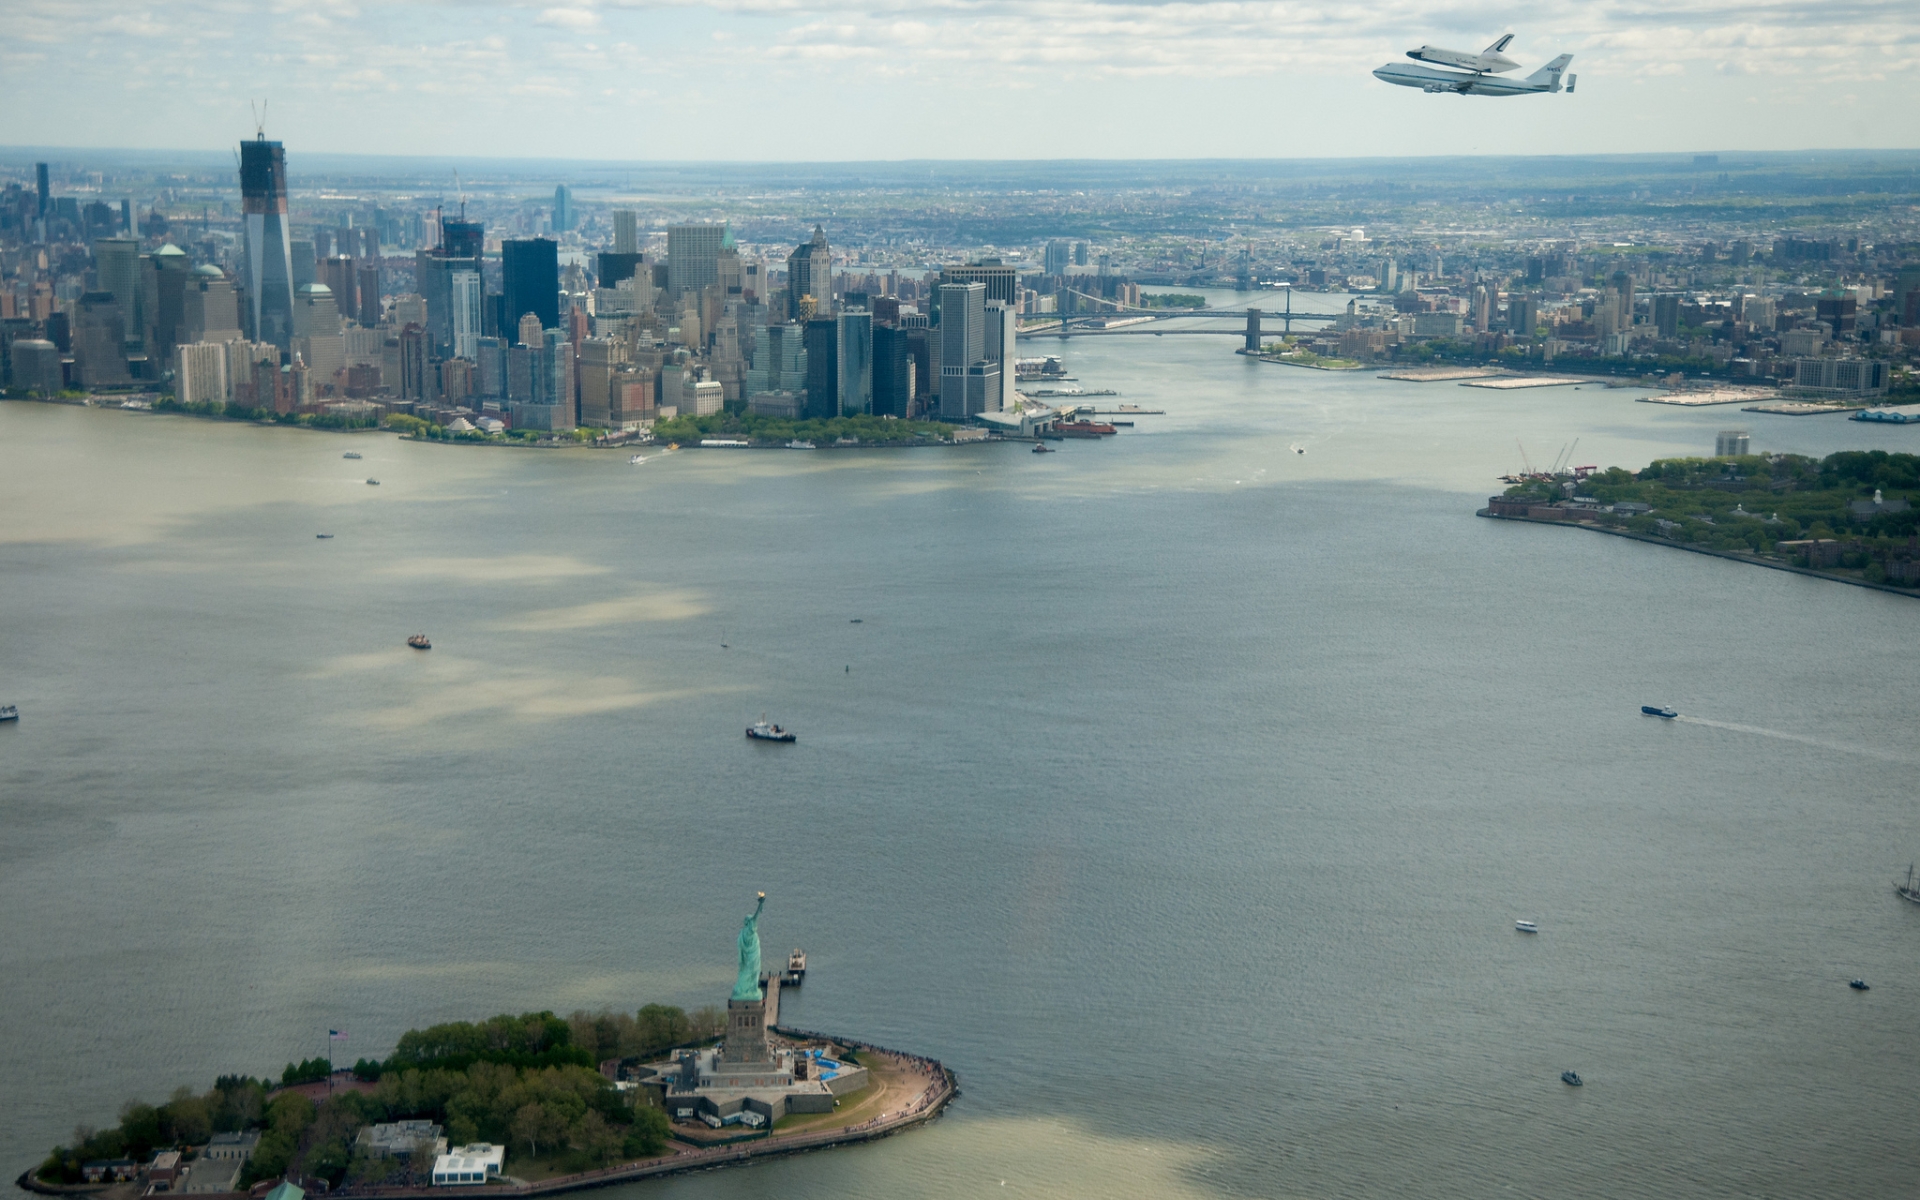 man made, city, airplane, building, cityscape, cloud, new york, shuttle, skyscraper, space shuttle, cities Full HD